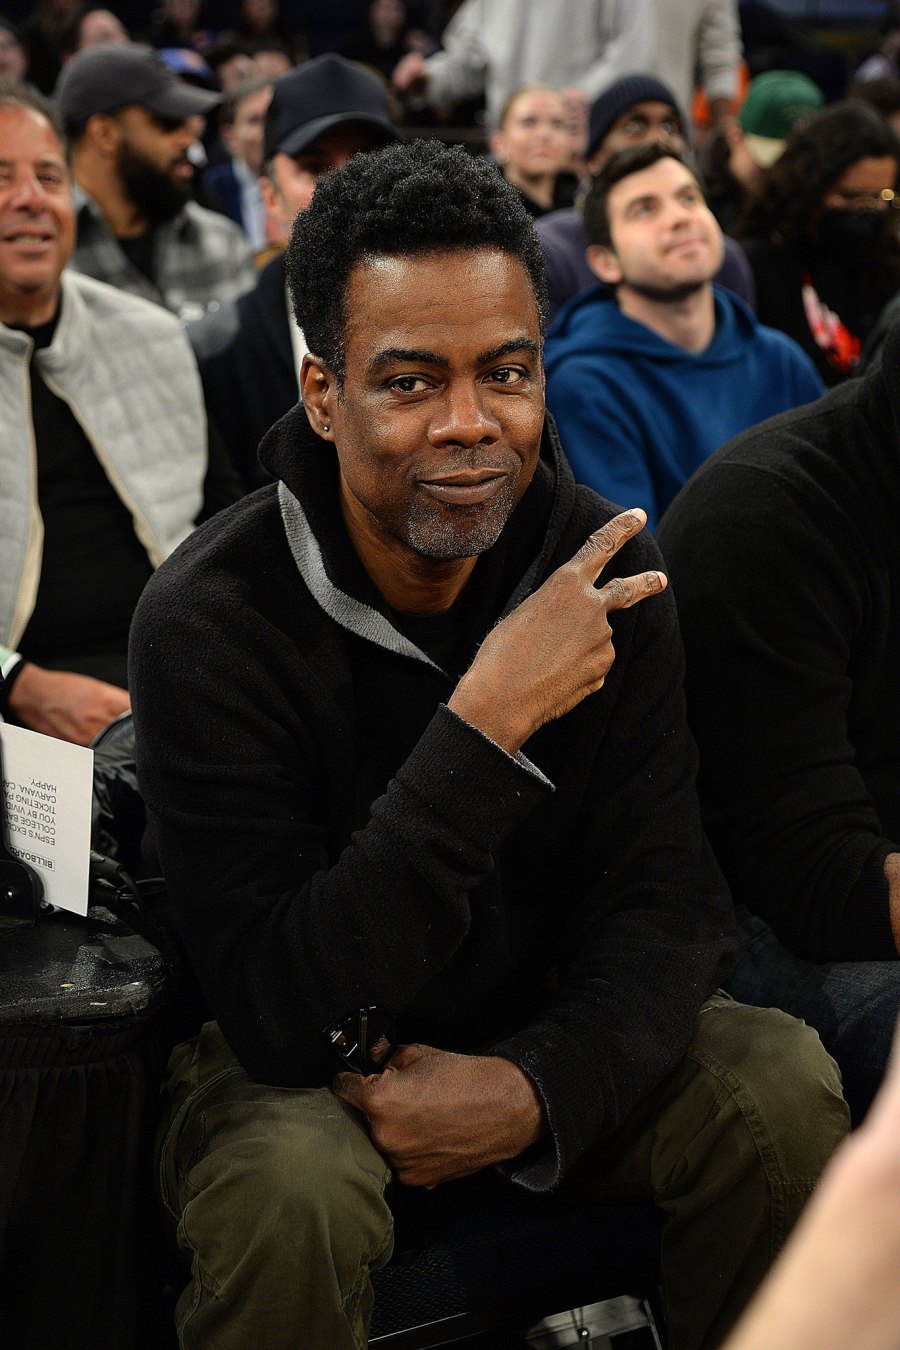 Chris Rock Says He's Single After Lake Bell Romance